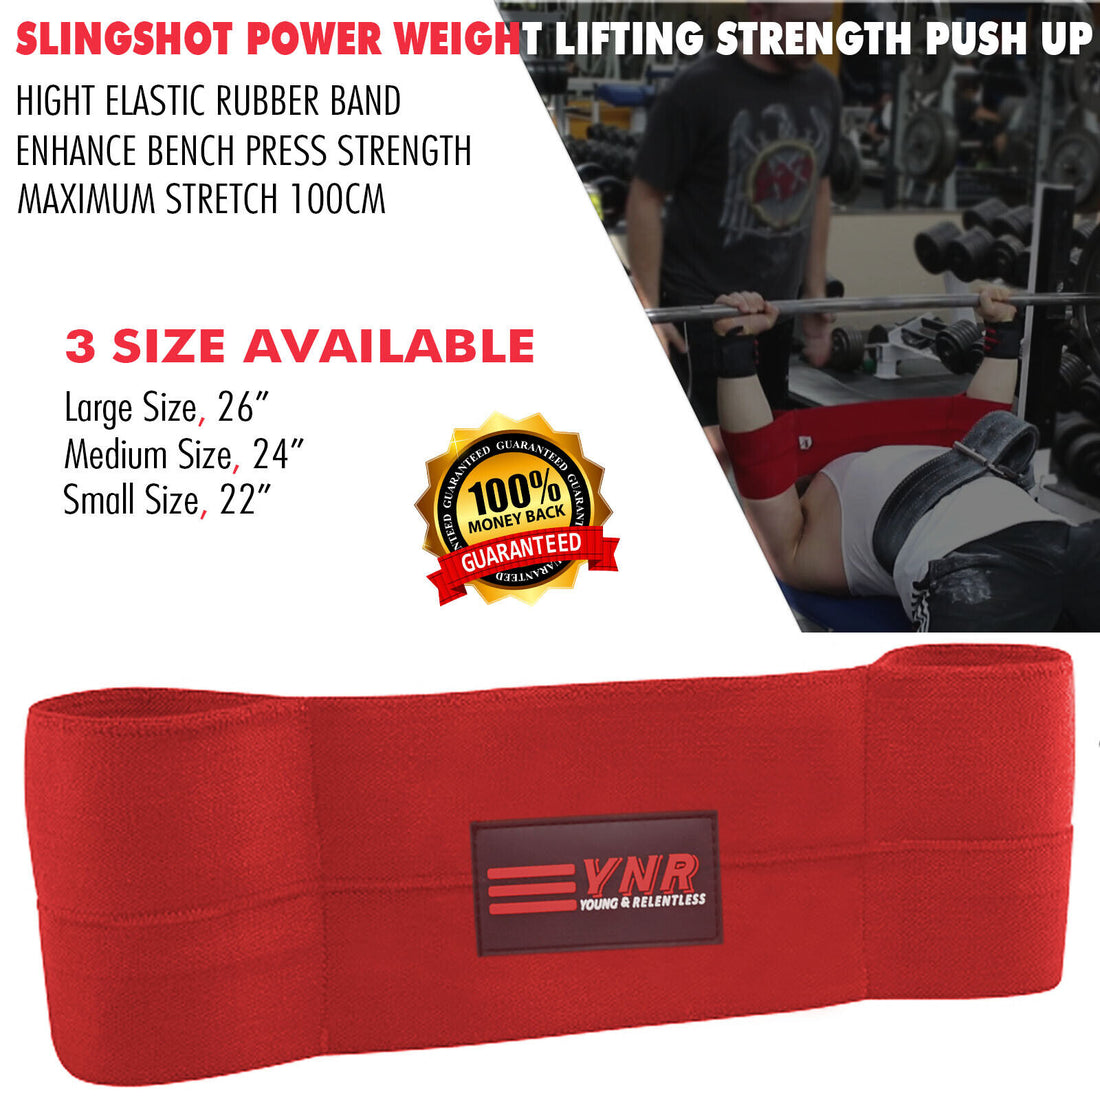 Bench Press Slingshot | Weightlifting & Fitness Training | YNR Sports Fitness